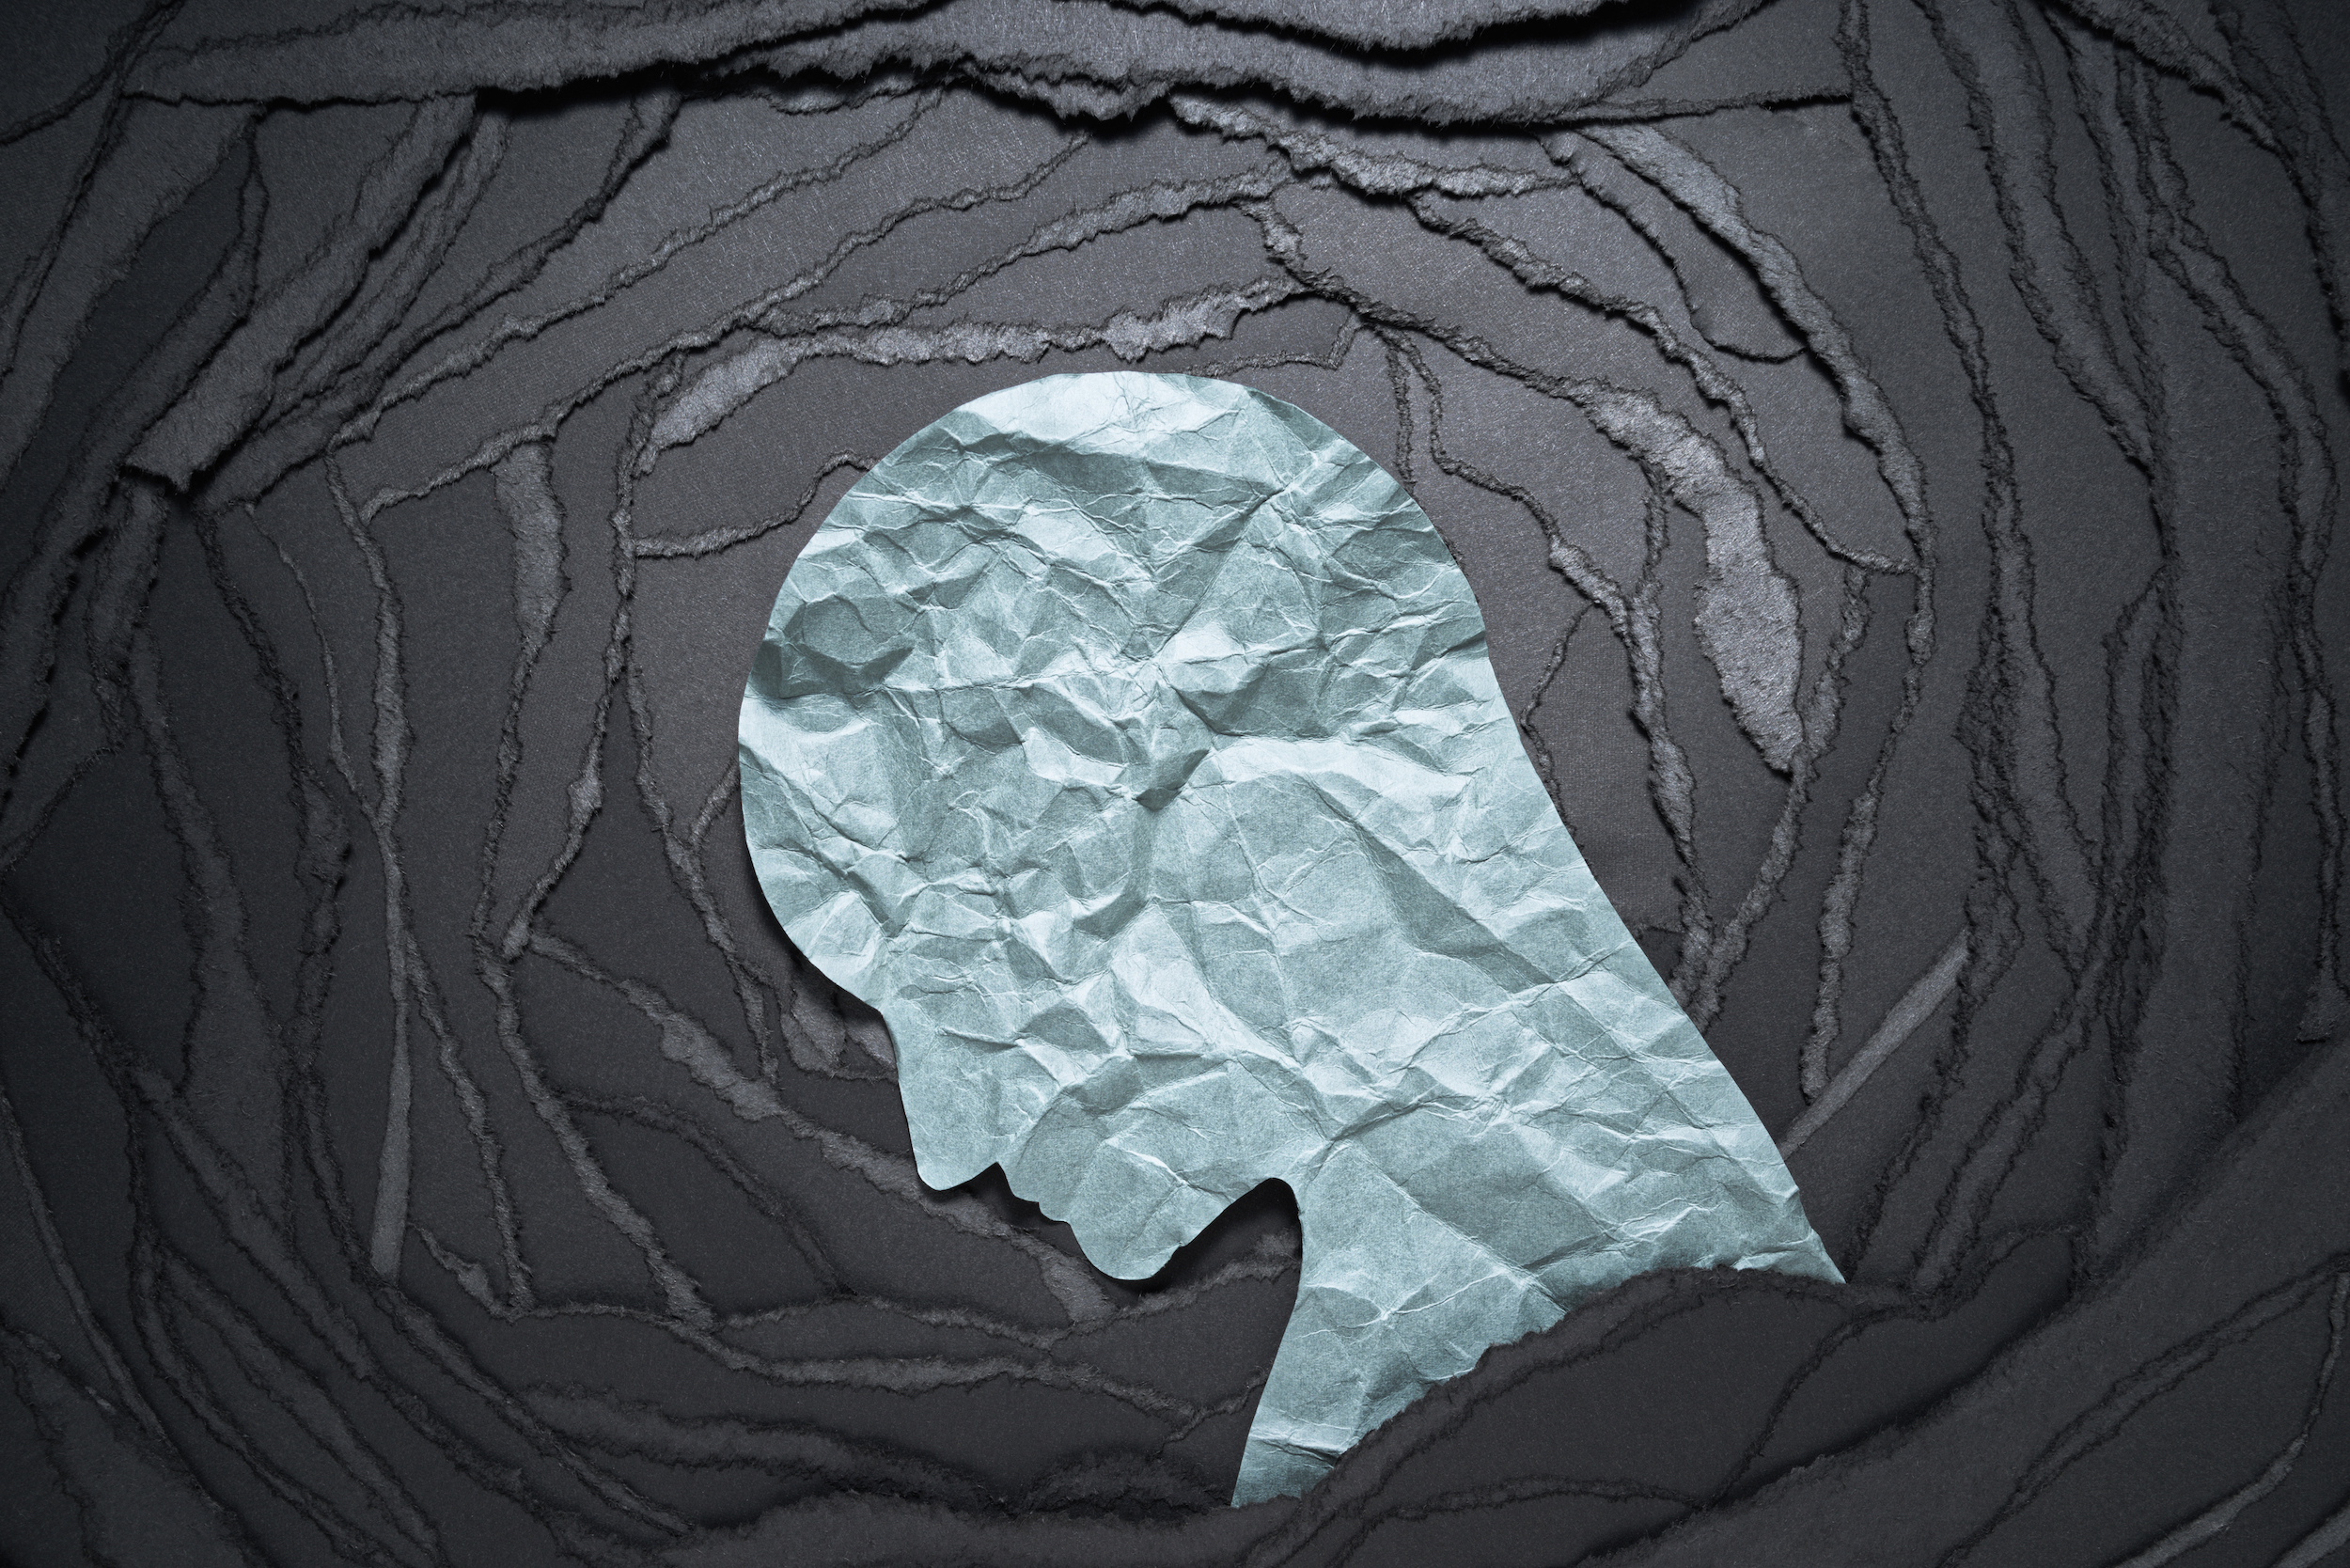 Paper cutout of a man's head on a black background.